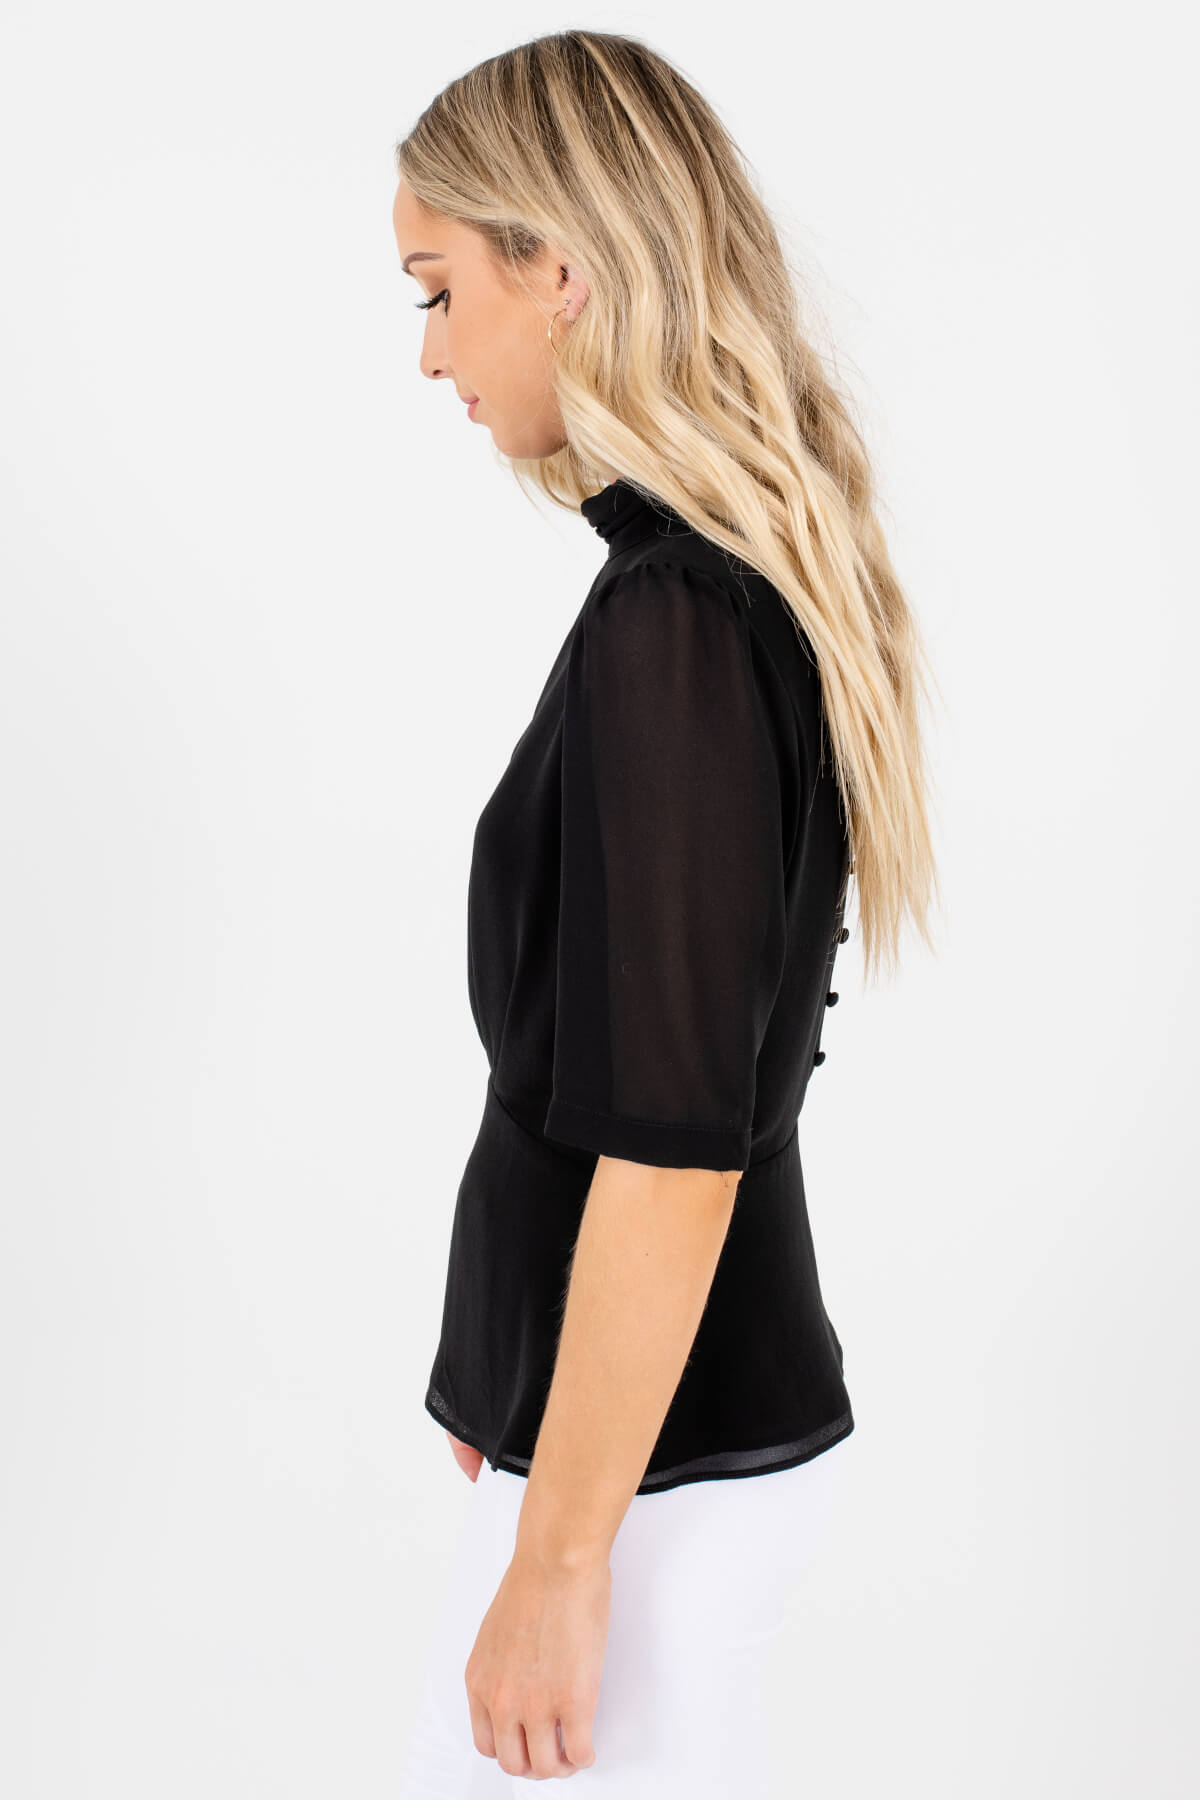 Women's Black Pleated Accented Boutique Blouses